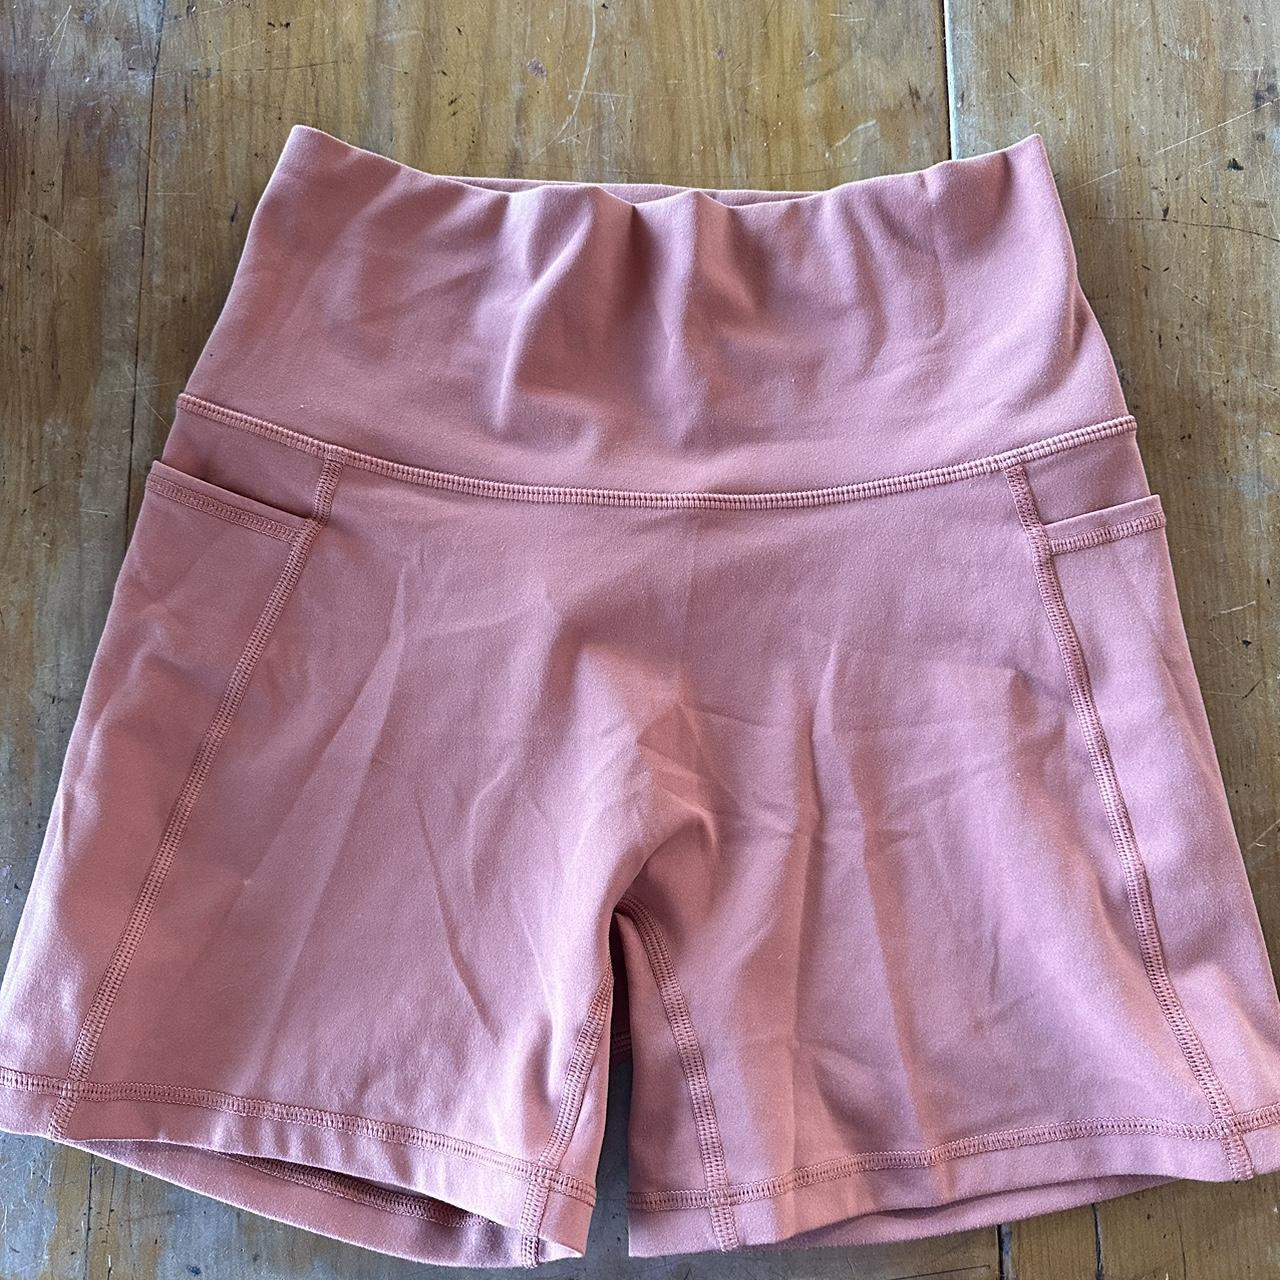 LSKD bike shorts Great condition worn a couple of... - Depop